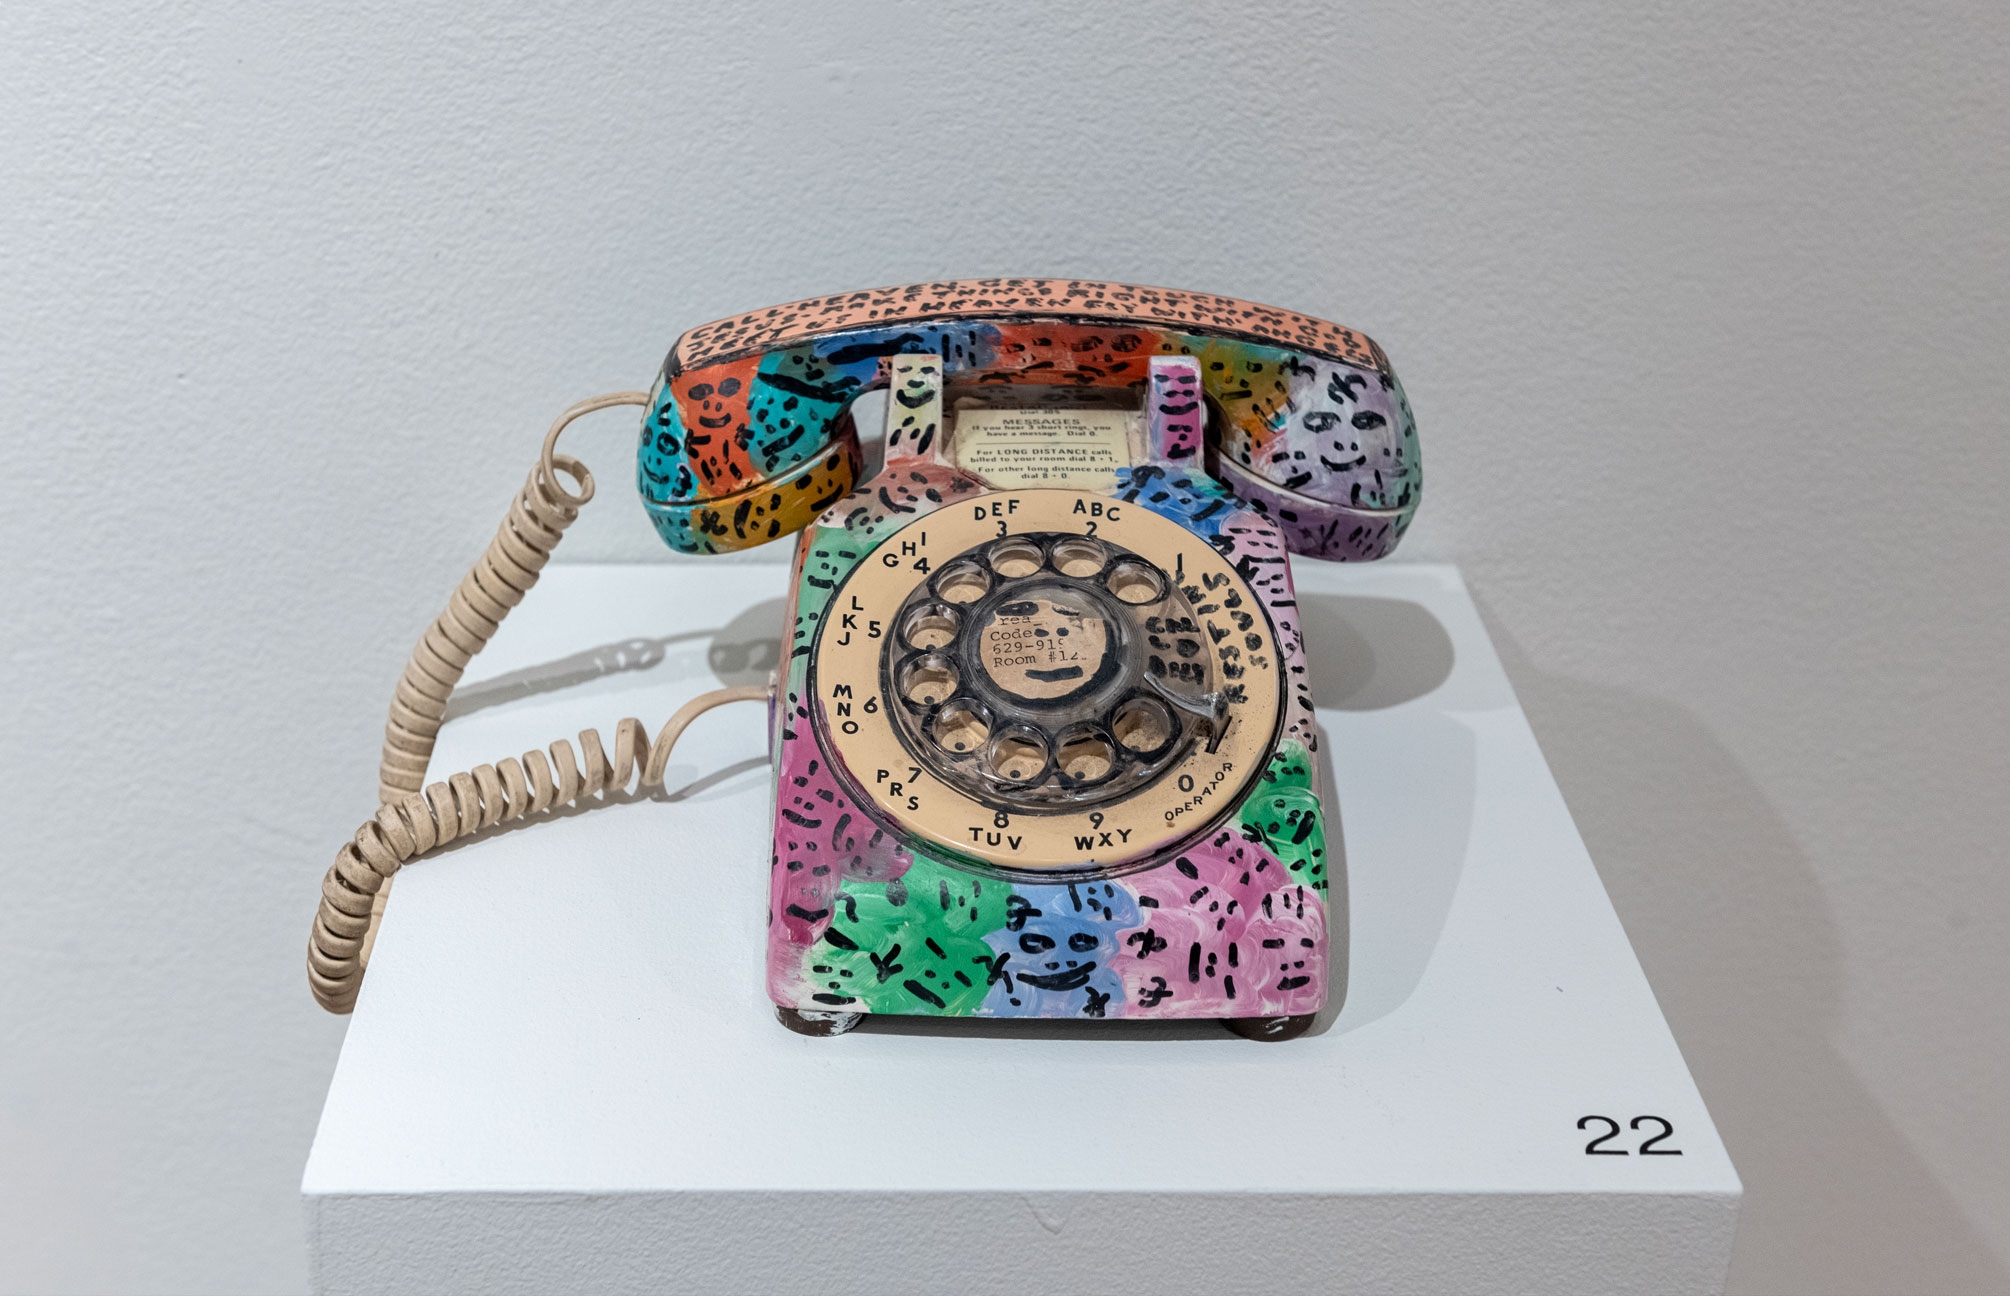 painted dial telephone